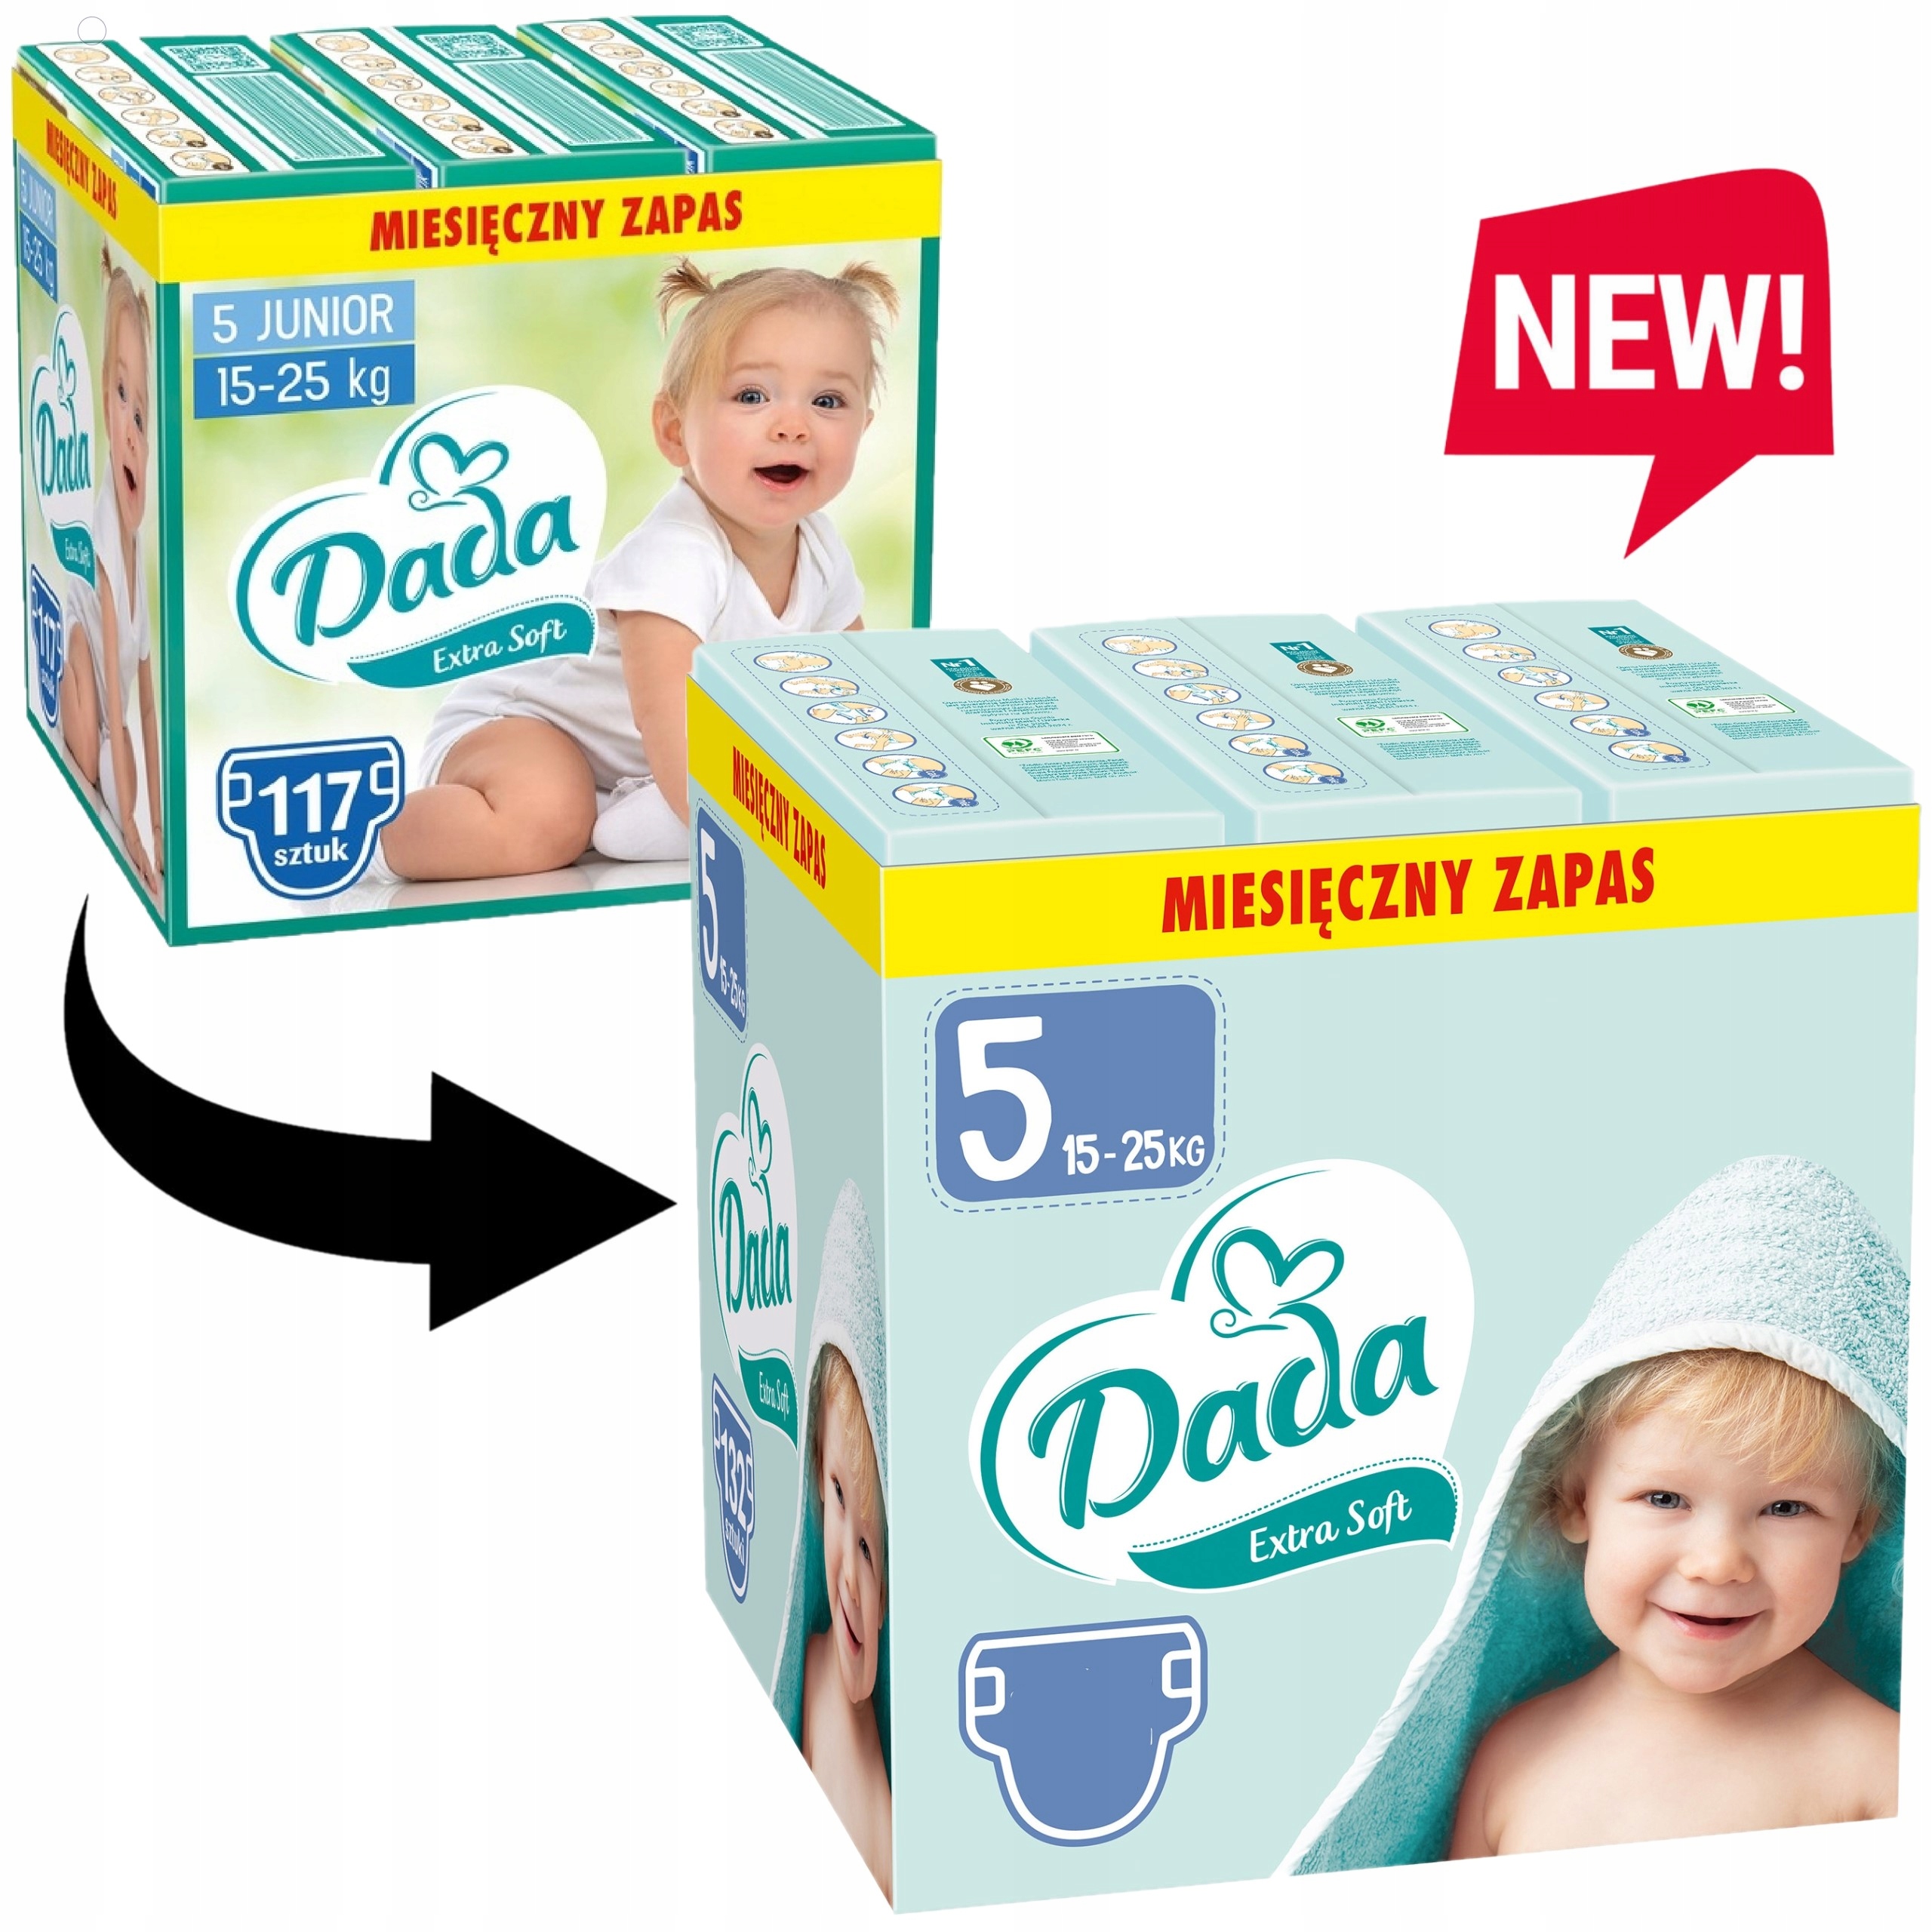 allegro pampers activ e baby